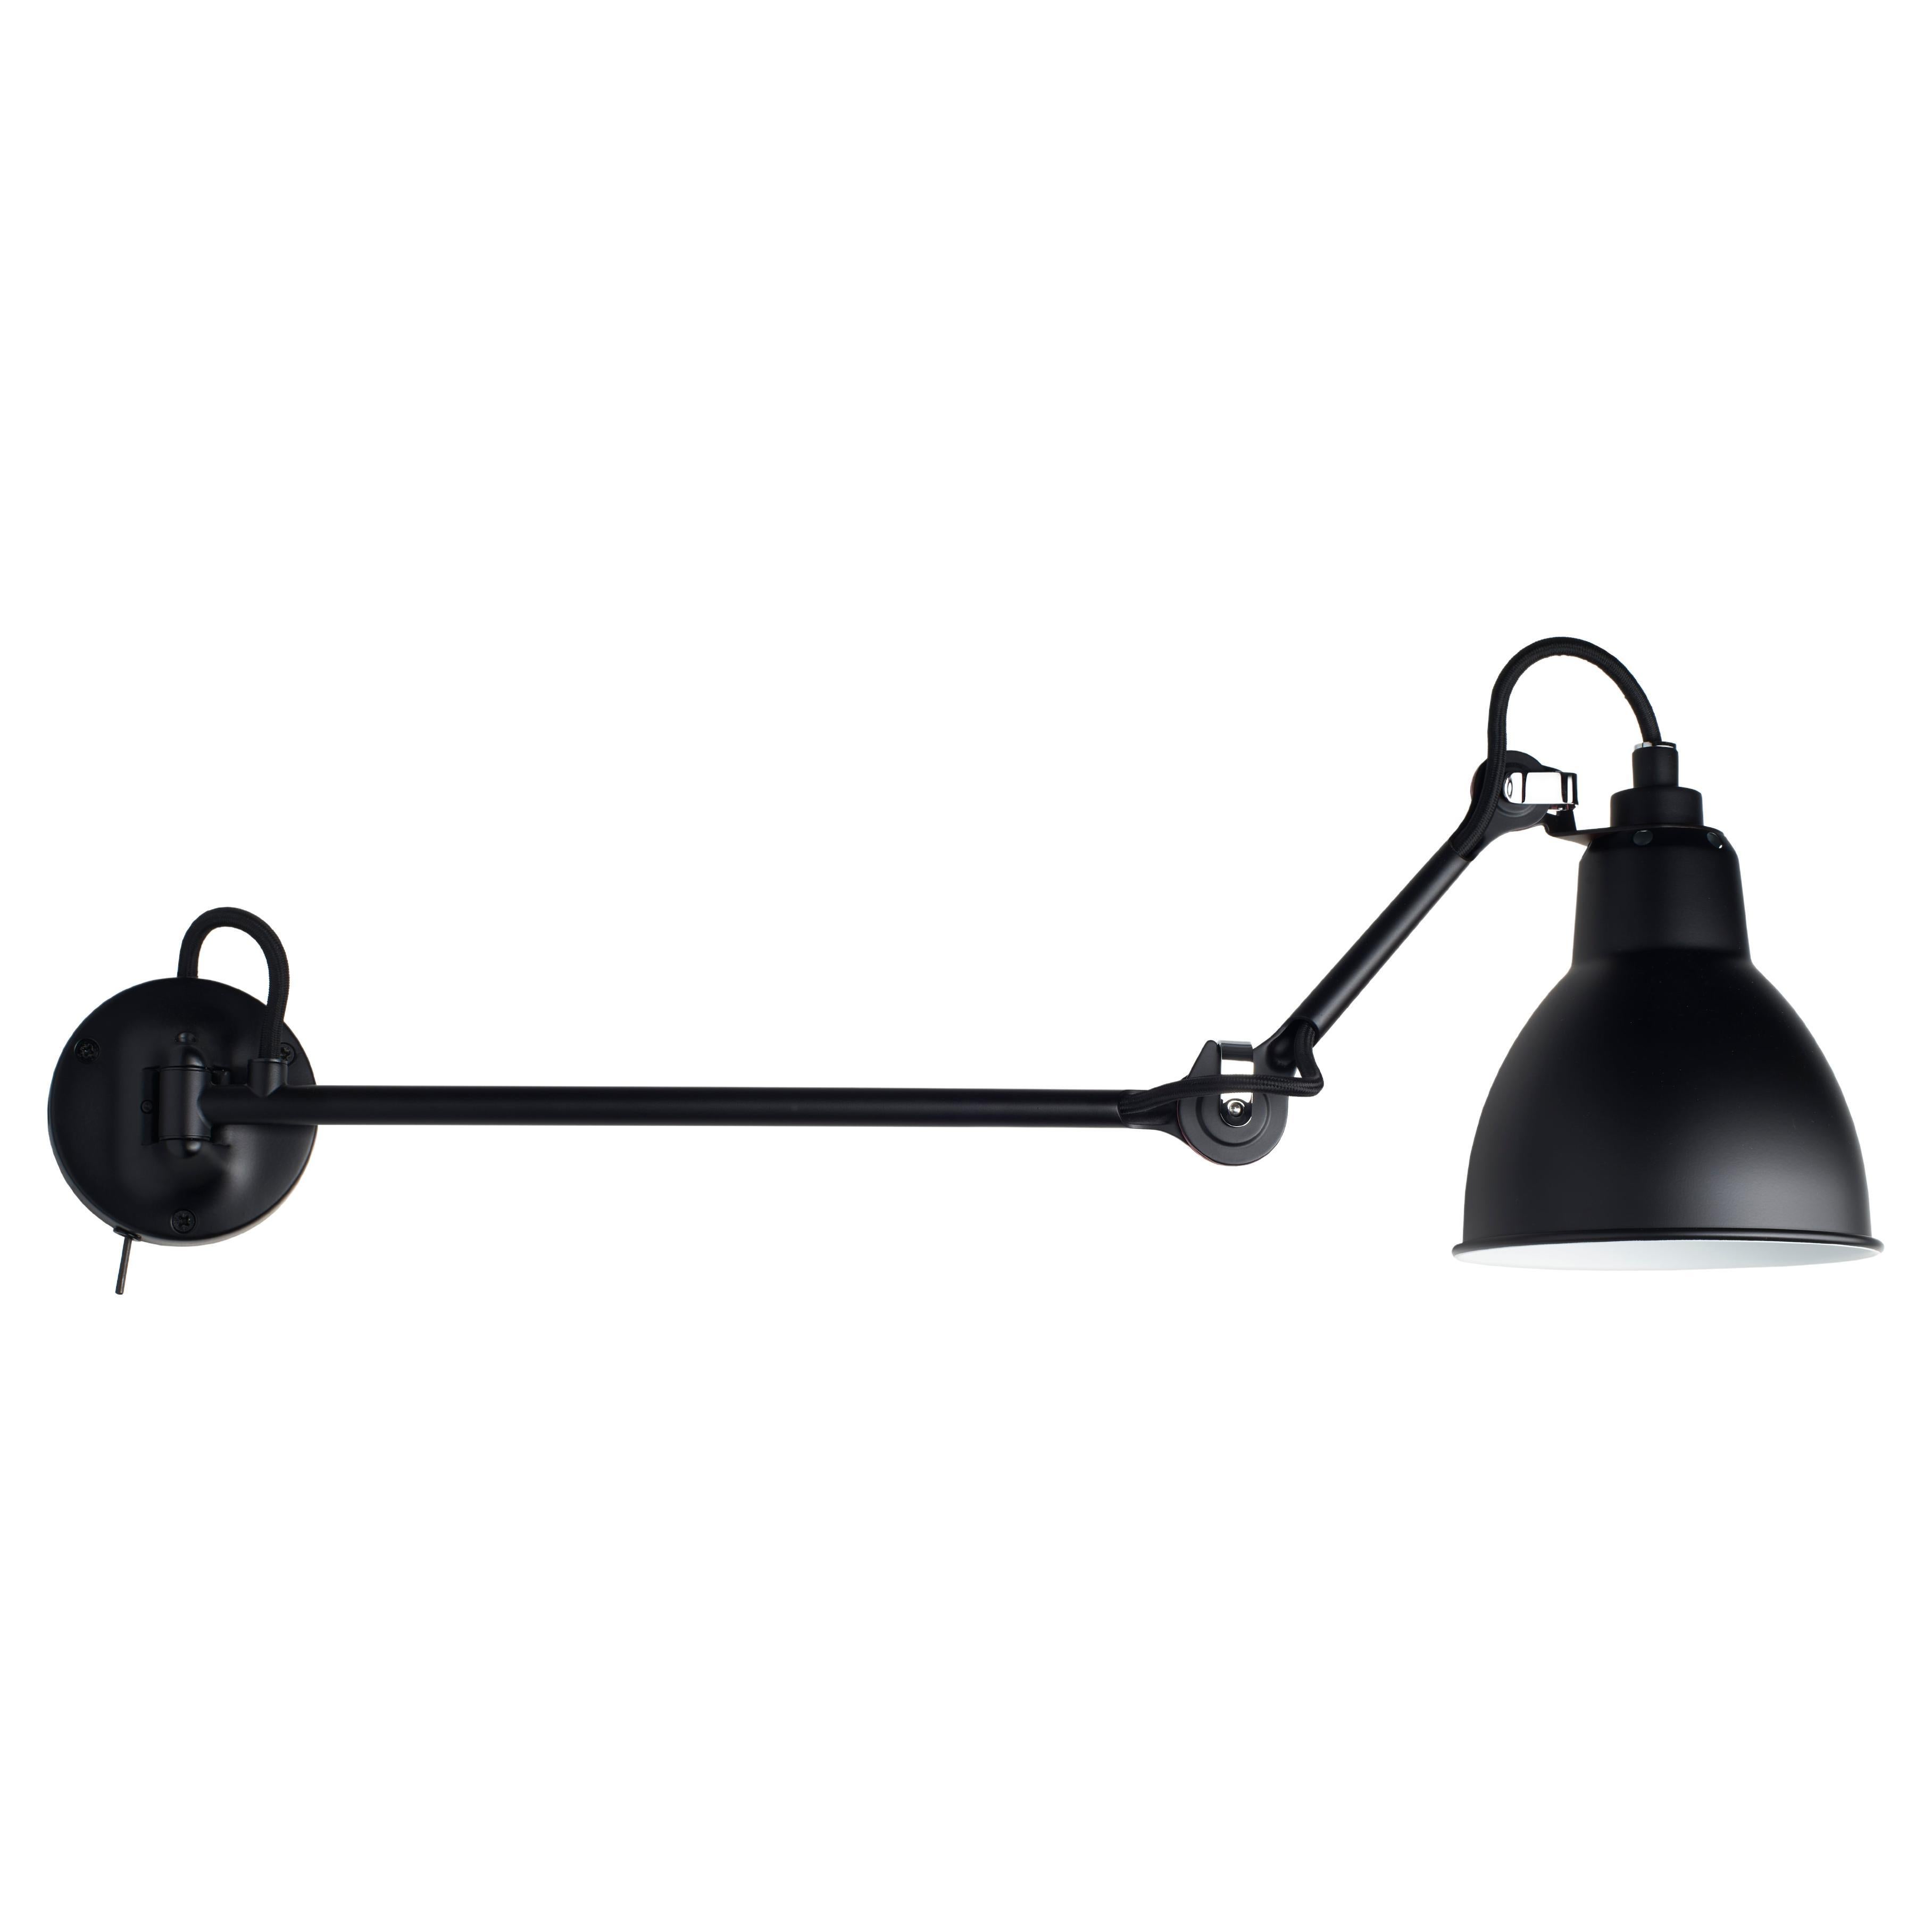 DCW Editions La Lampe Gras N°204 L40 SW Wall Lamp in Black Arm & Black Shade For Sale